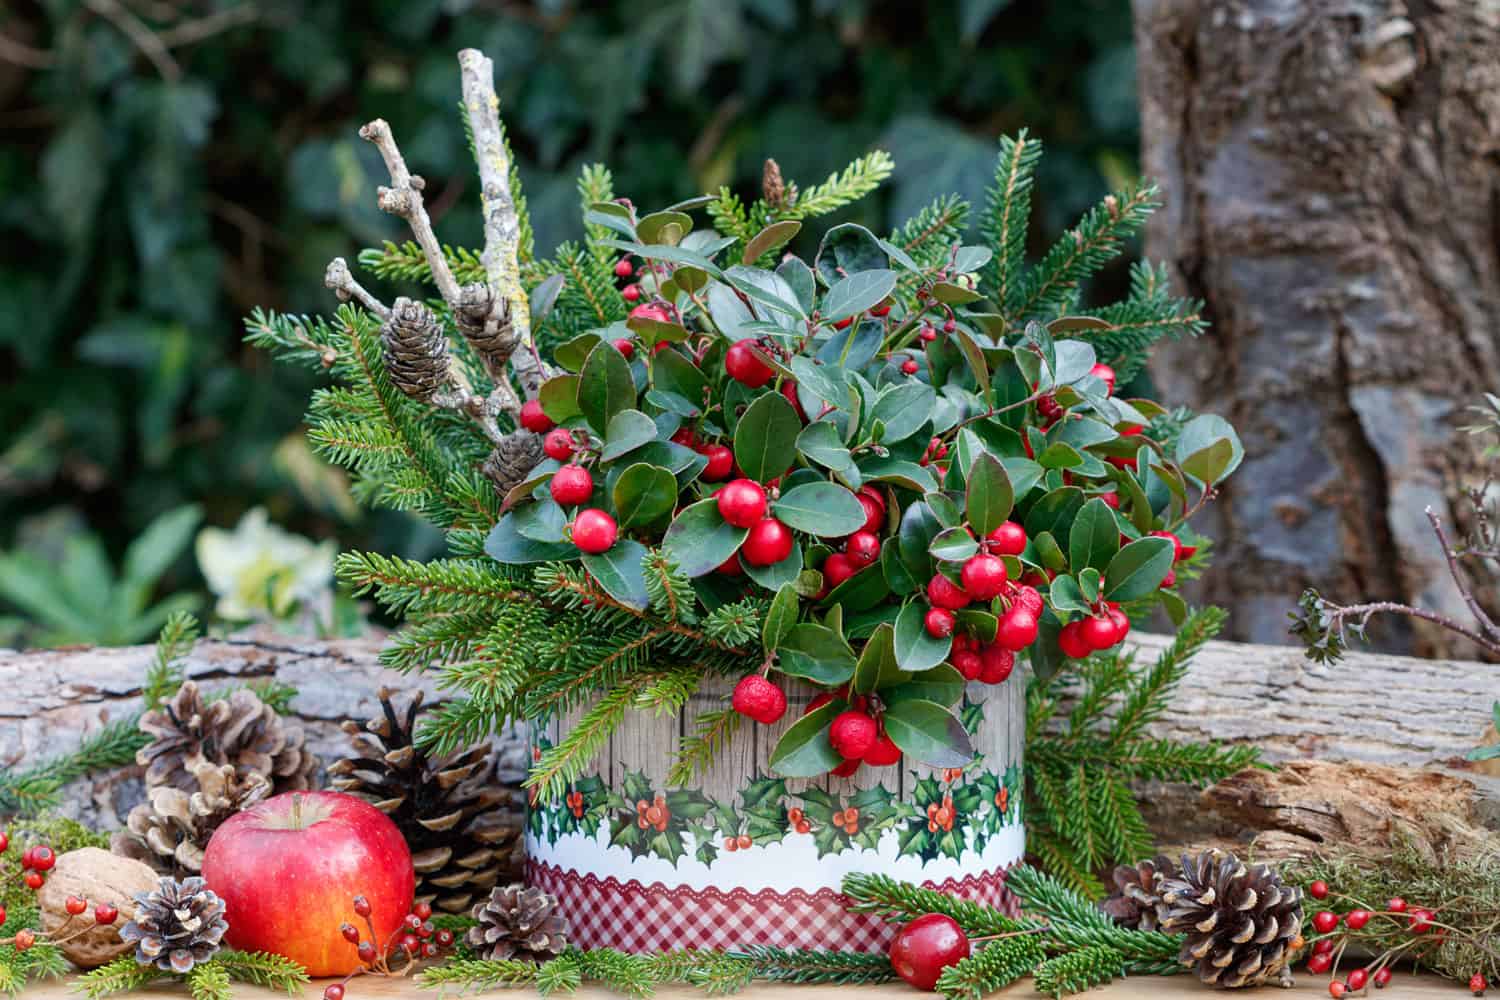 gaultheria procumbens and fir branches in box as winter garden decoration